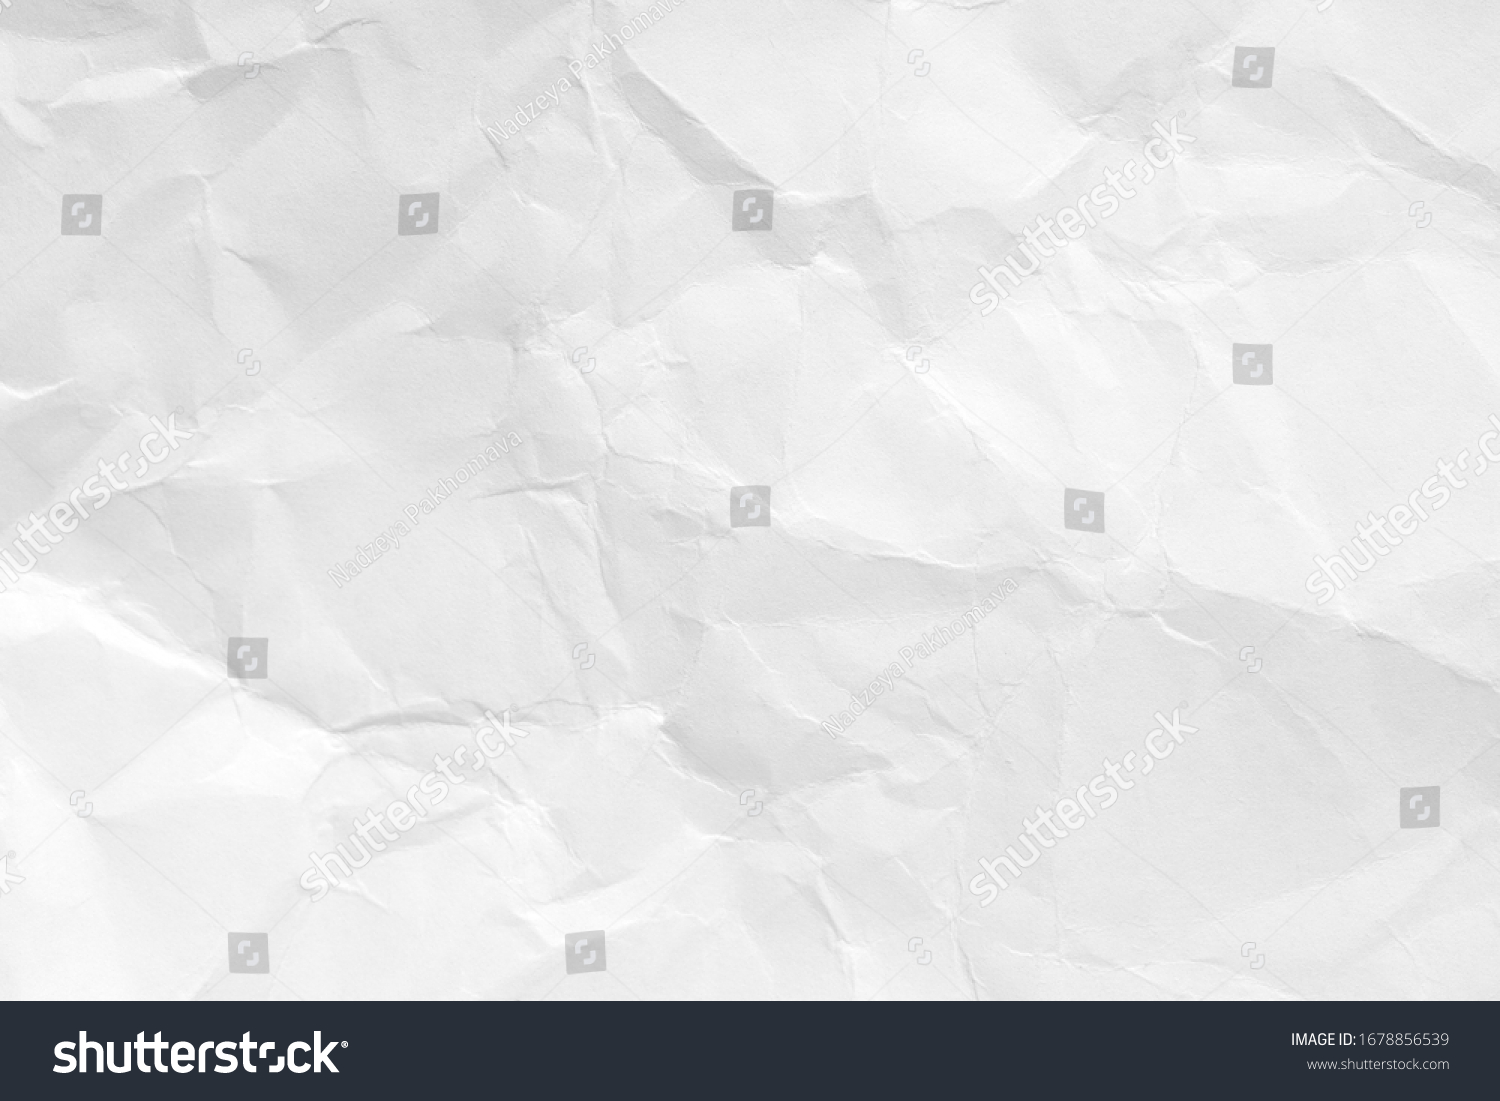 White crumpled paper background, texture old for web design screensavers. Template for various purposes or creating packaging. #1678856539